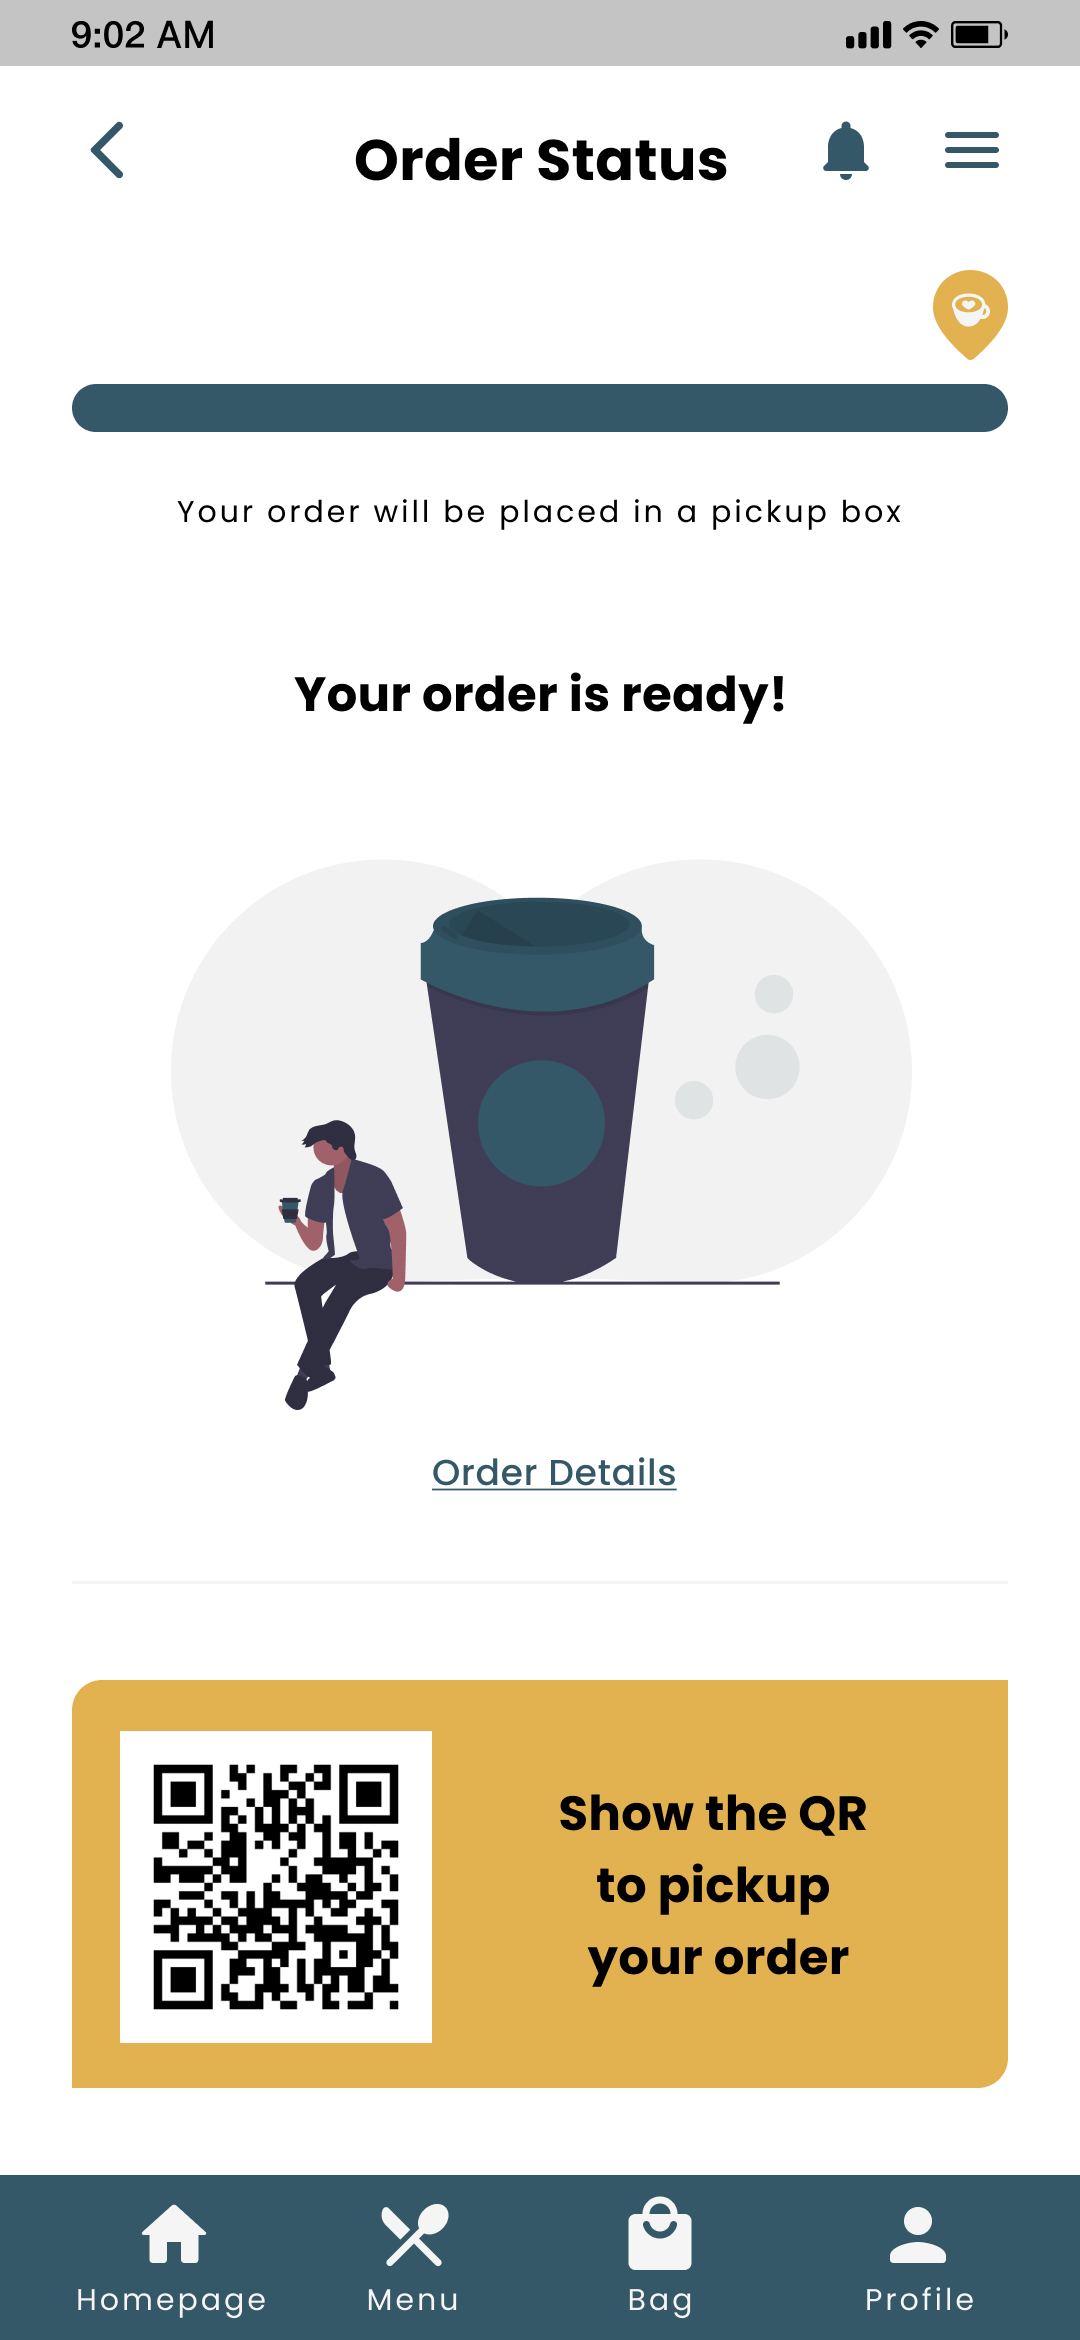 COCO Order Status "Order Ready" screen for mobile app